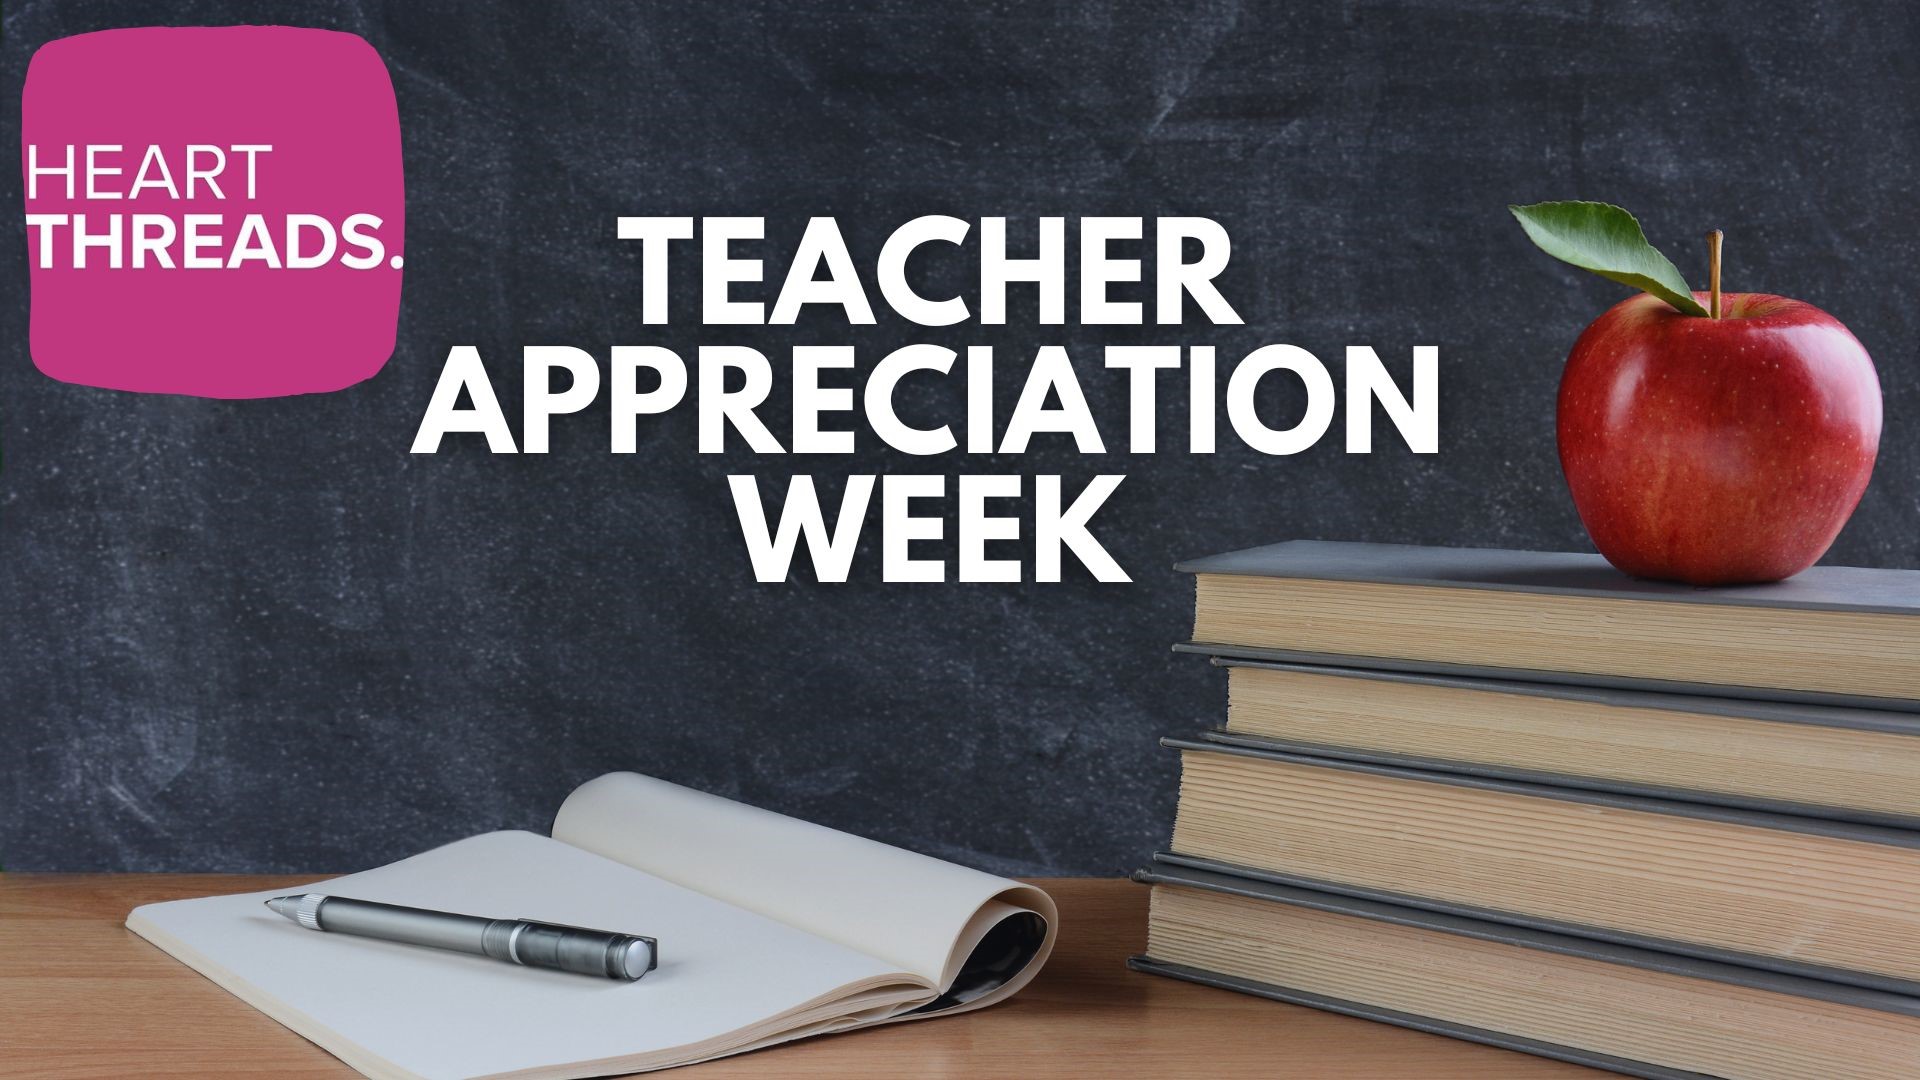 Heartwarming stories highlighting teachers and all the works they do for teacher appreciation week.